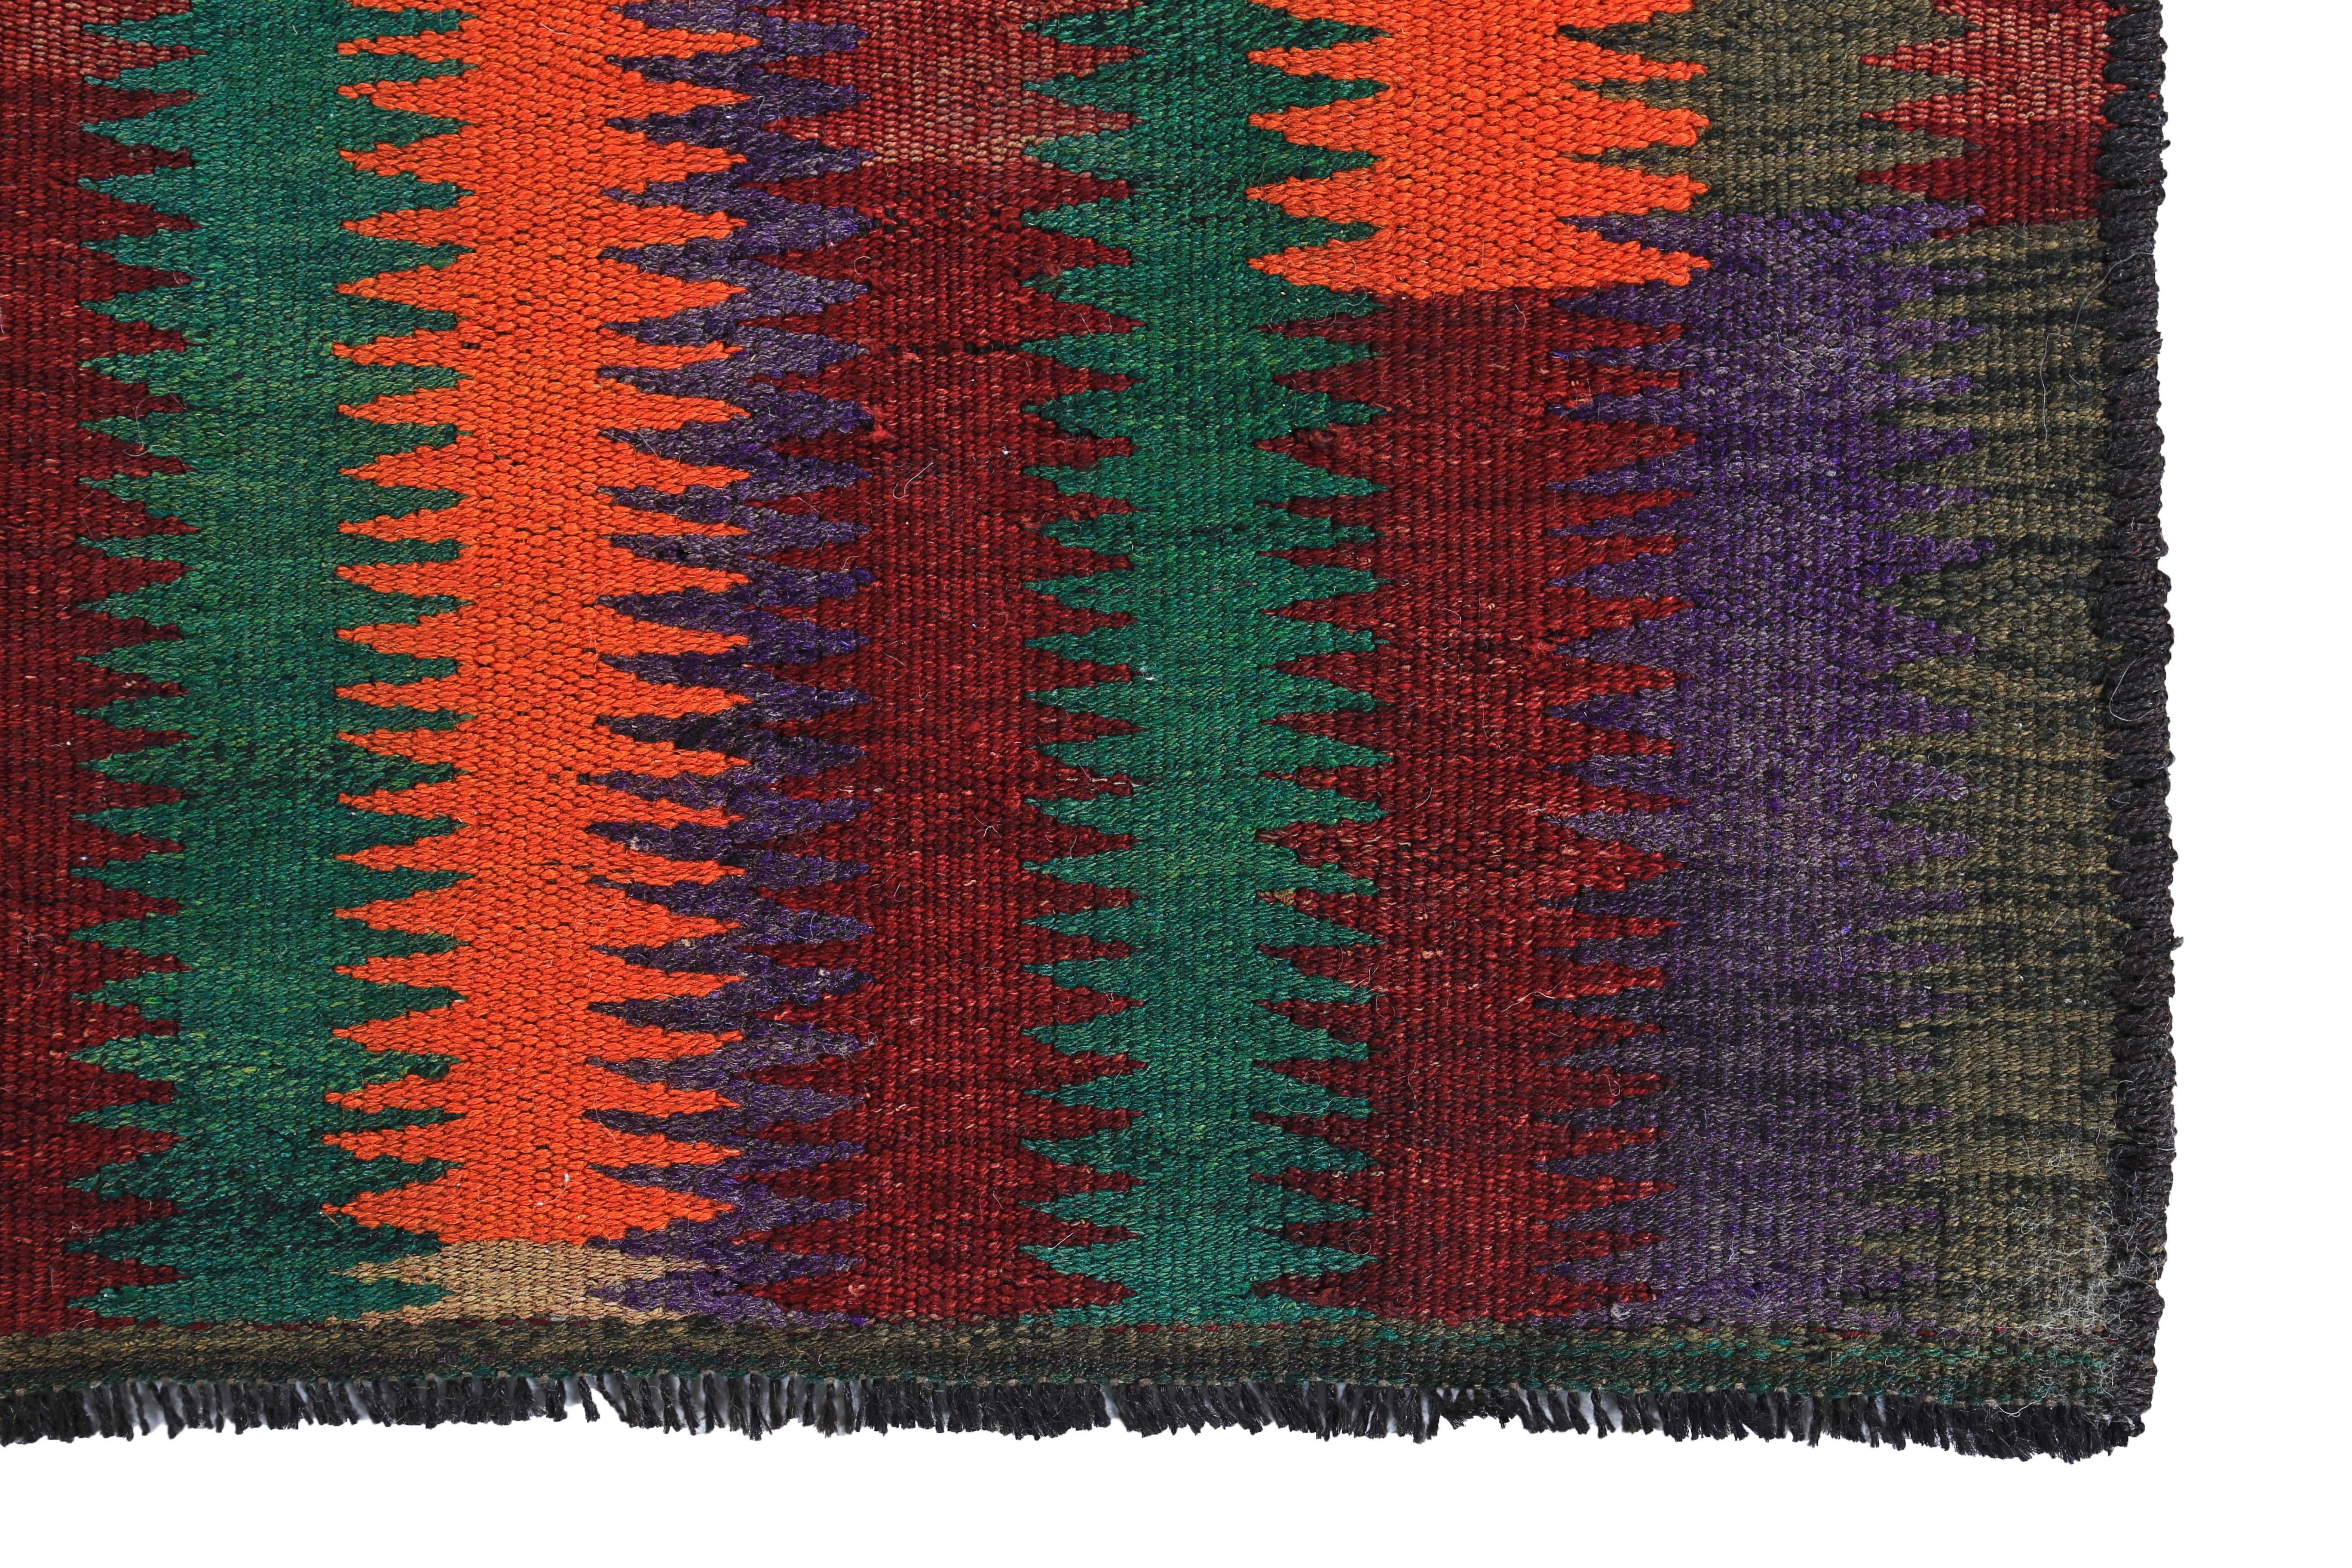 Hand-Woven Modern Turkish Kilim Rug with Red, Orange and Green Tribal Stripes For Sale